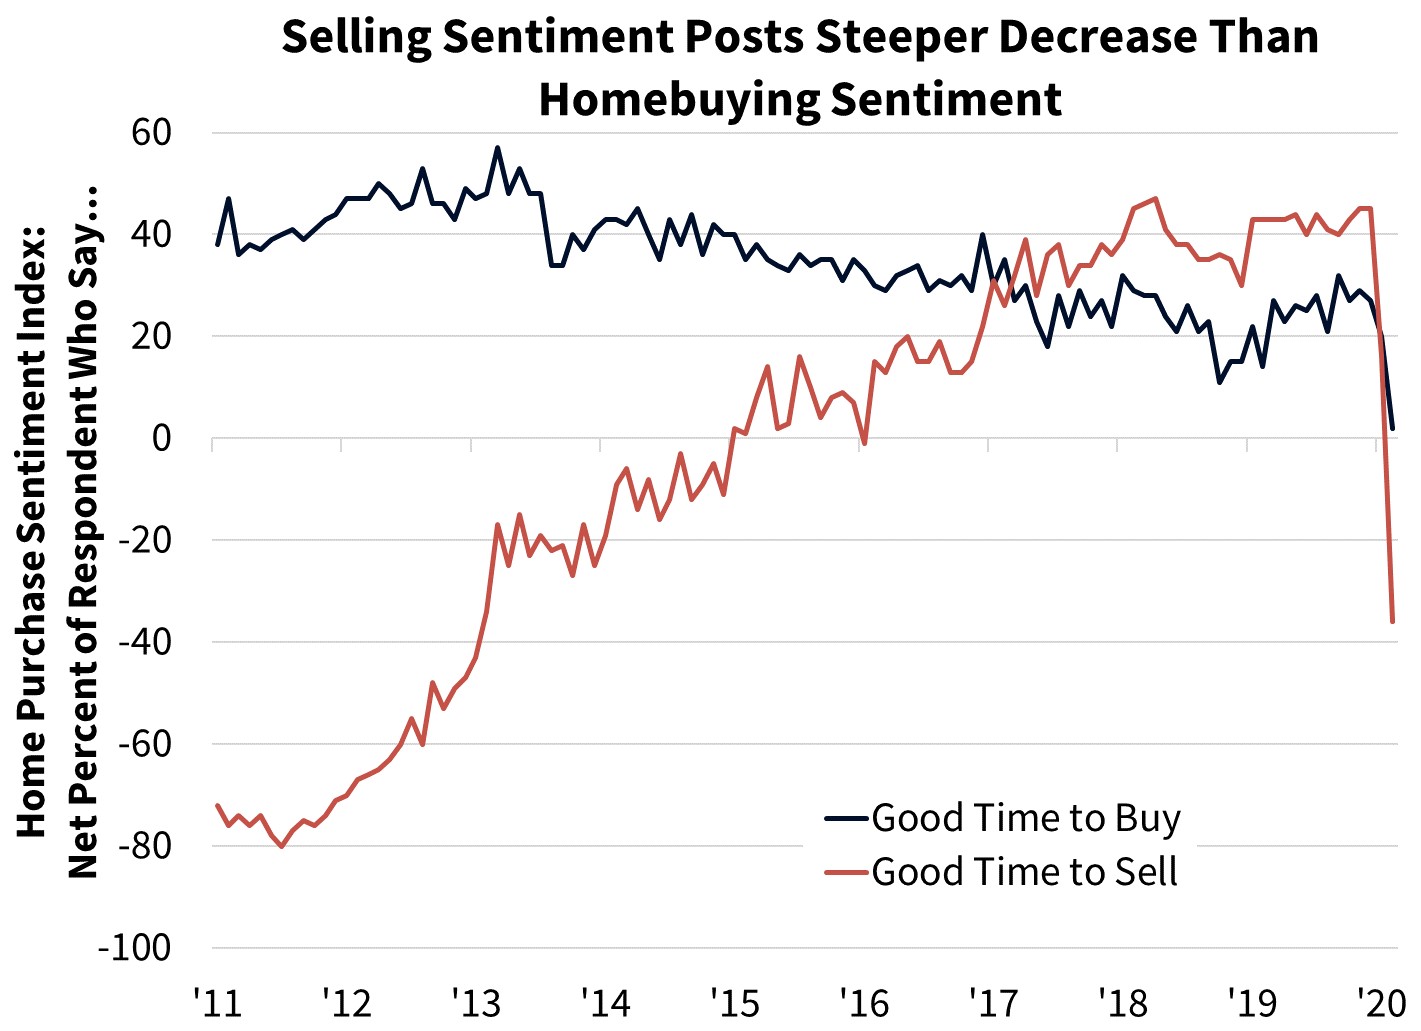  Selling Sentiment Posts Steeper Decrease Than Homebuying Sentiment  